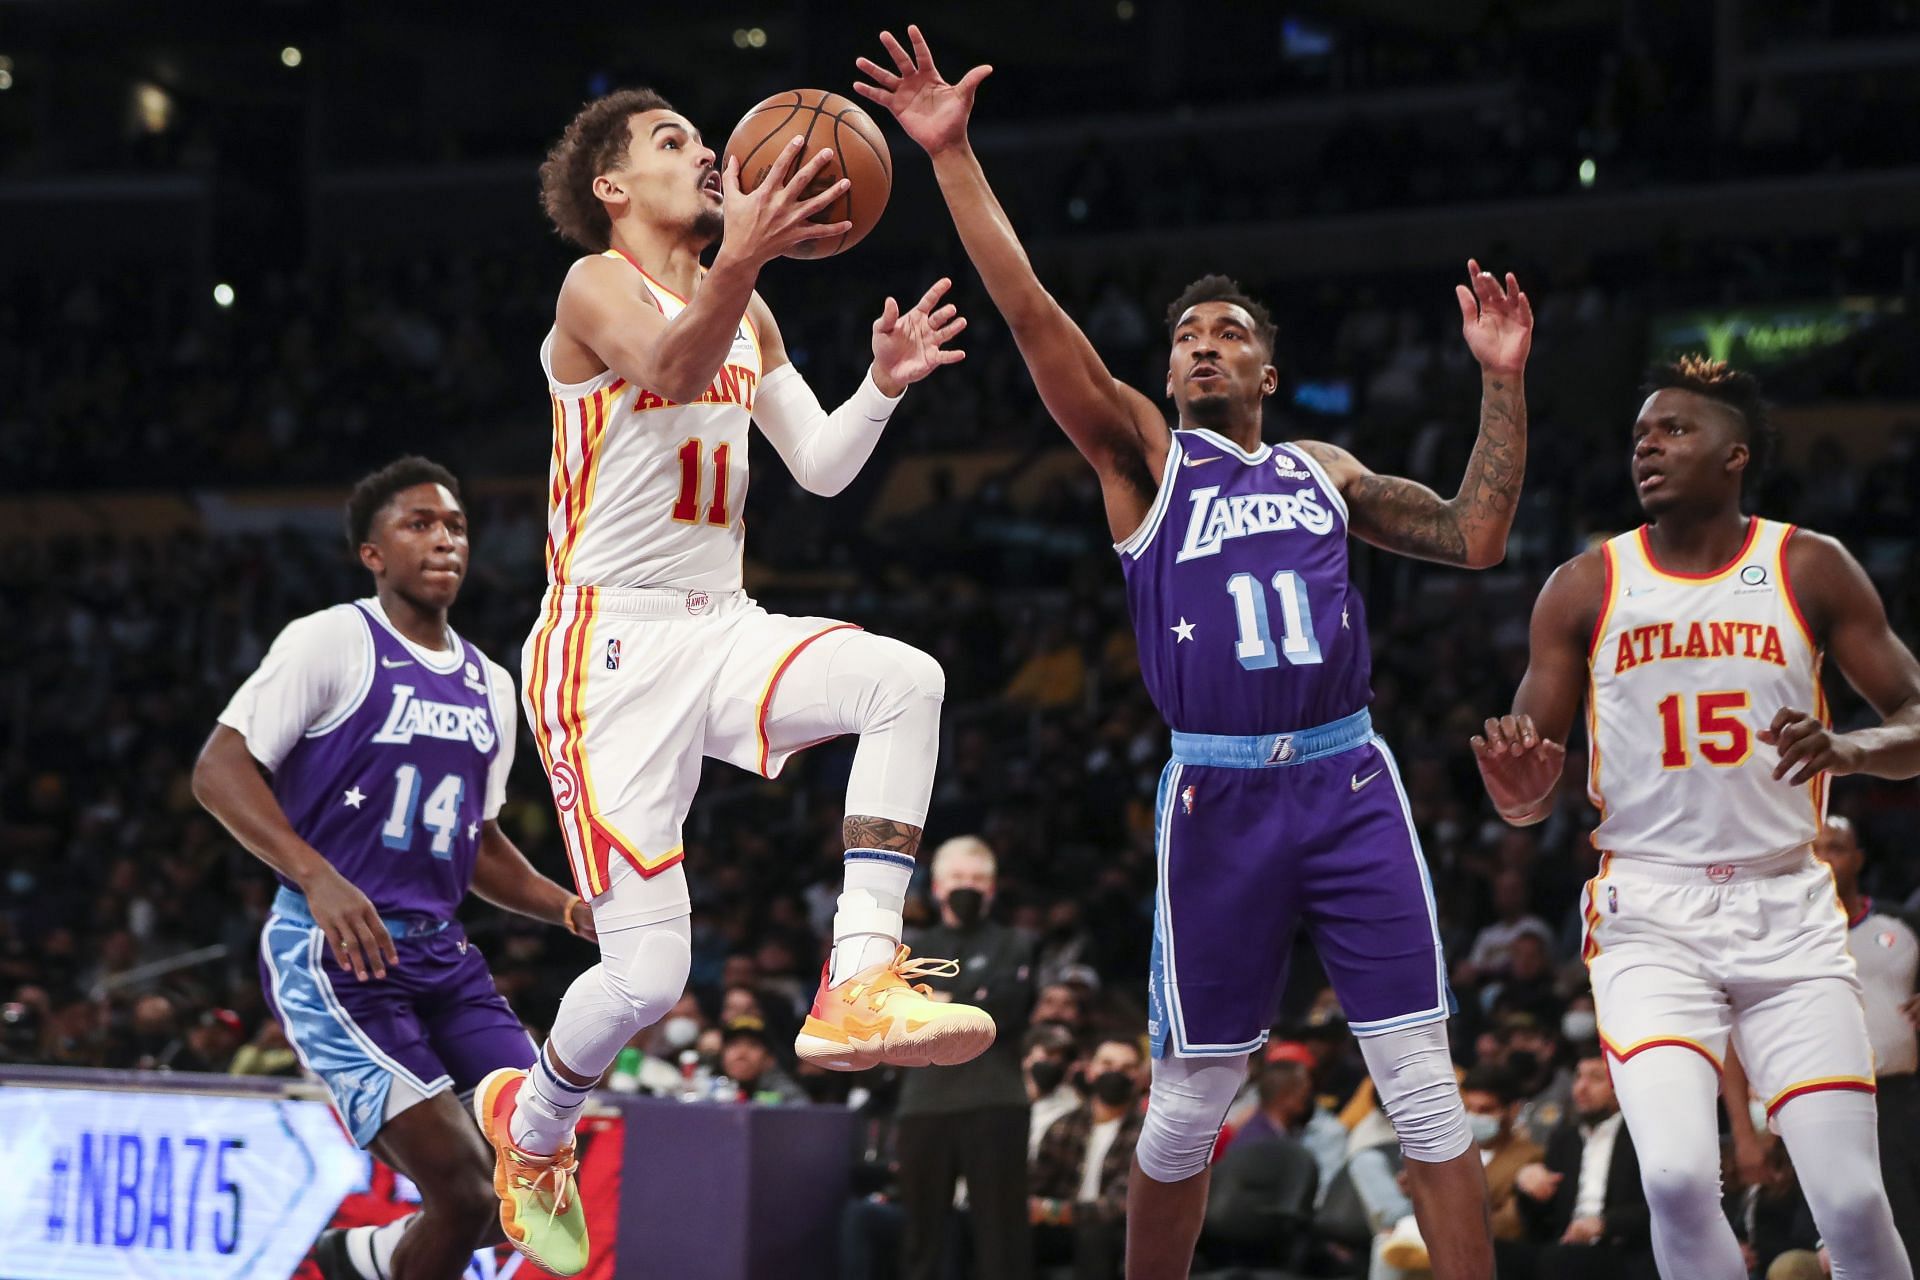 Atlanta Hawks All-Star Trae Young going up for a layup